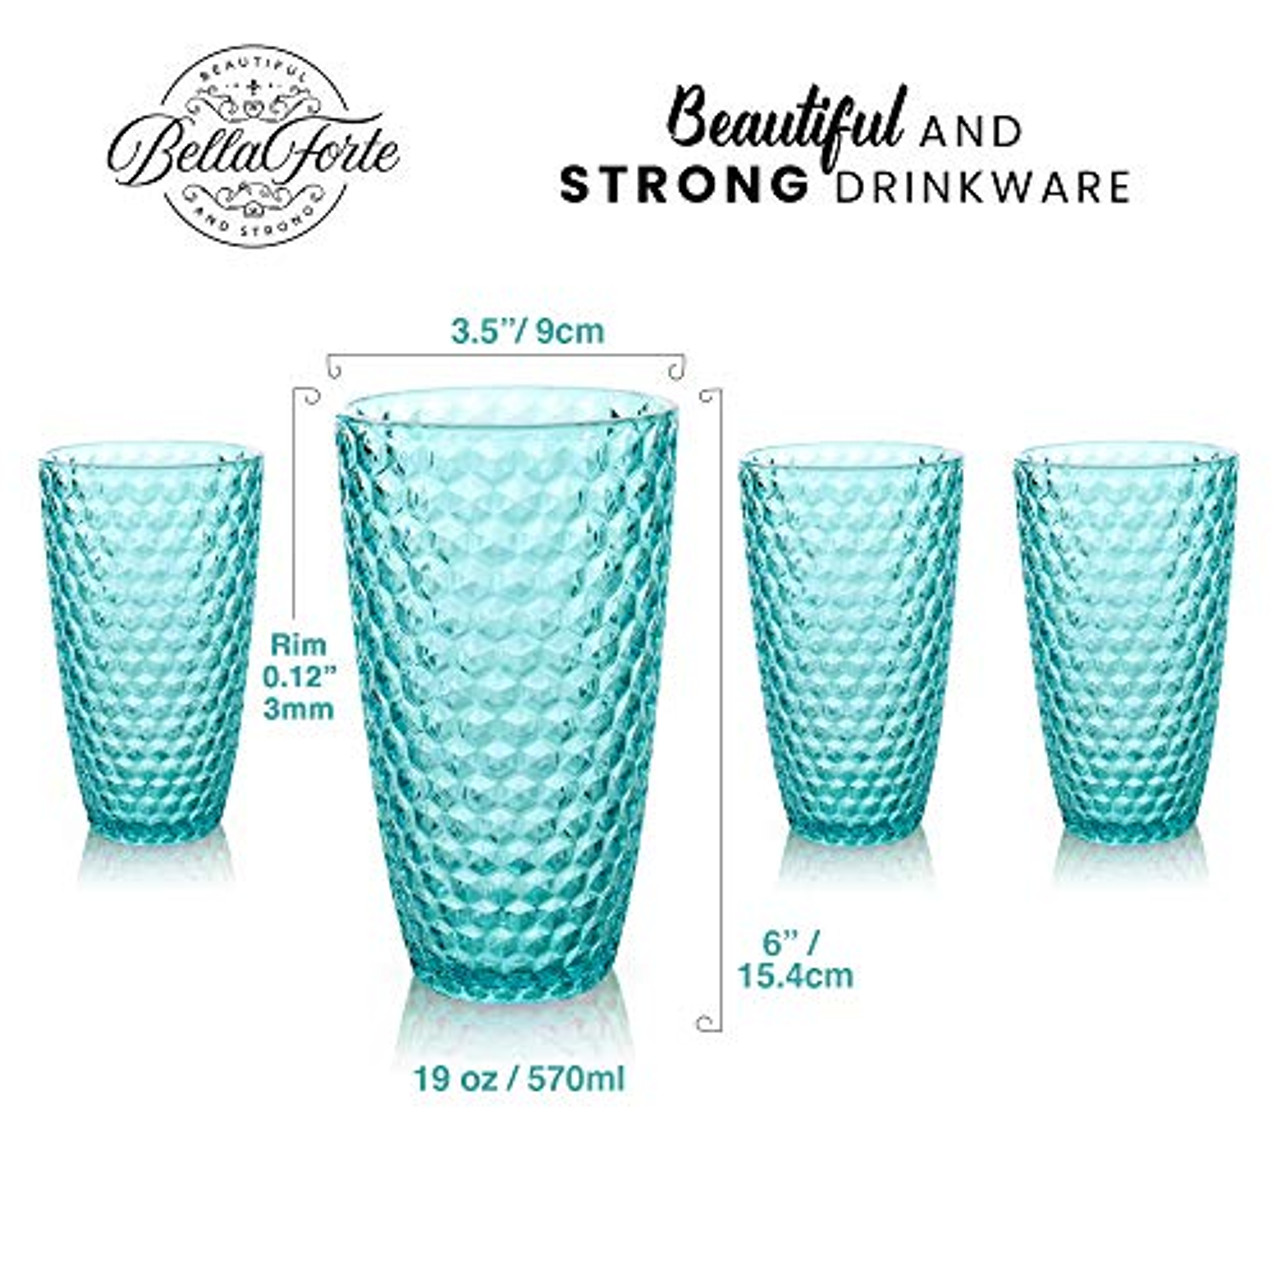 Best Drinkware for Outdoor Use